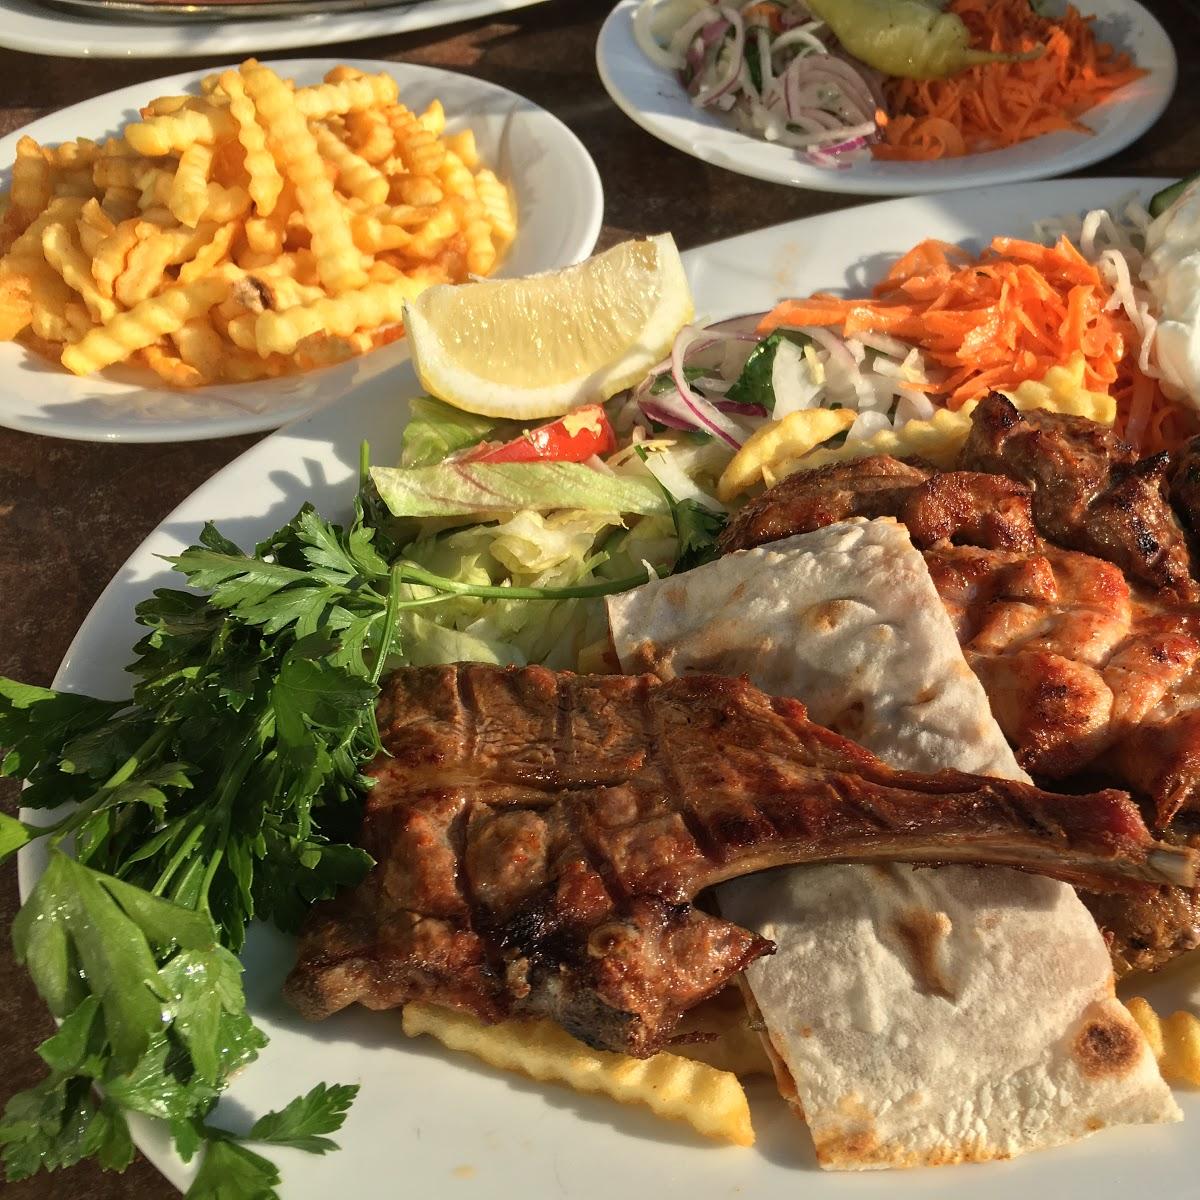 Restaurant "Urfa Palace" in Hannover